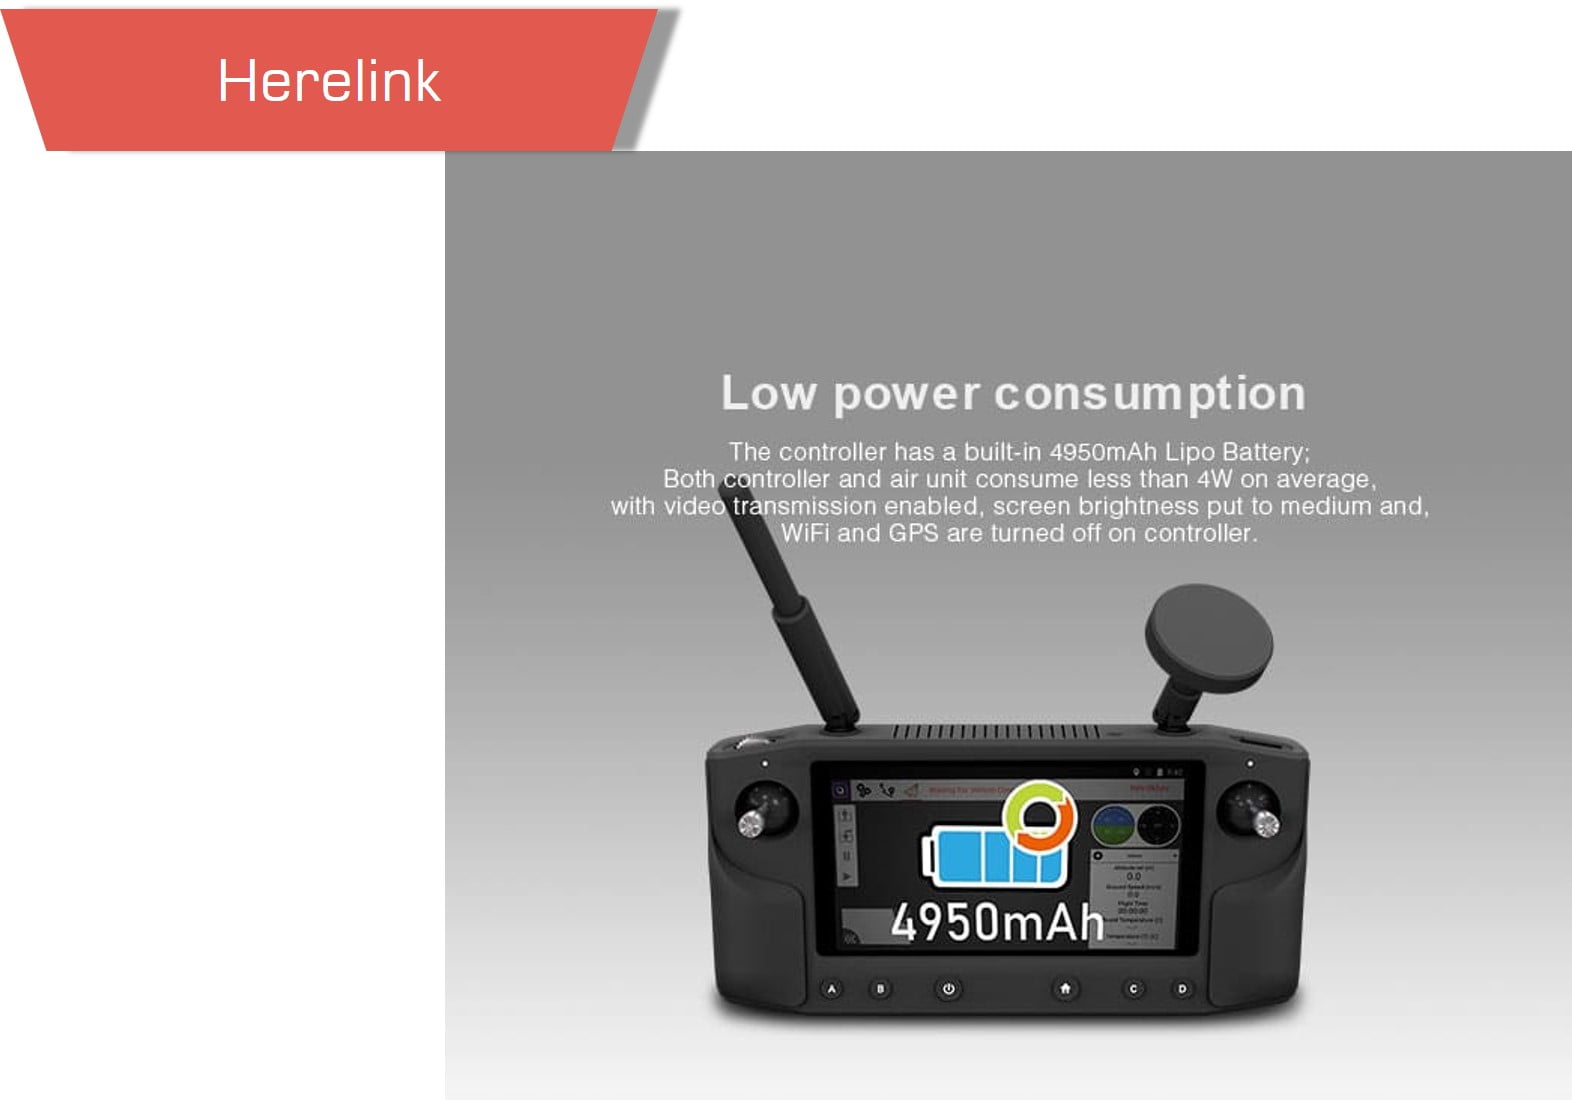 Fhmhmh - handheld herelink hd,herelink hd video,video transmission,control system - motionew - 4